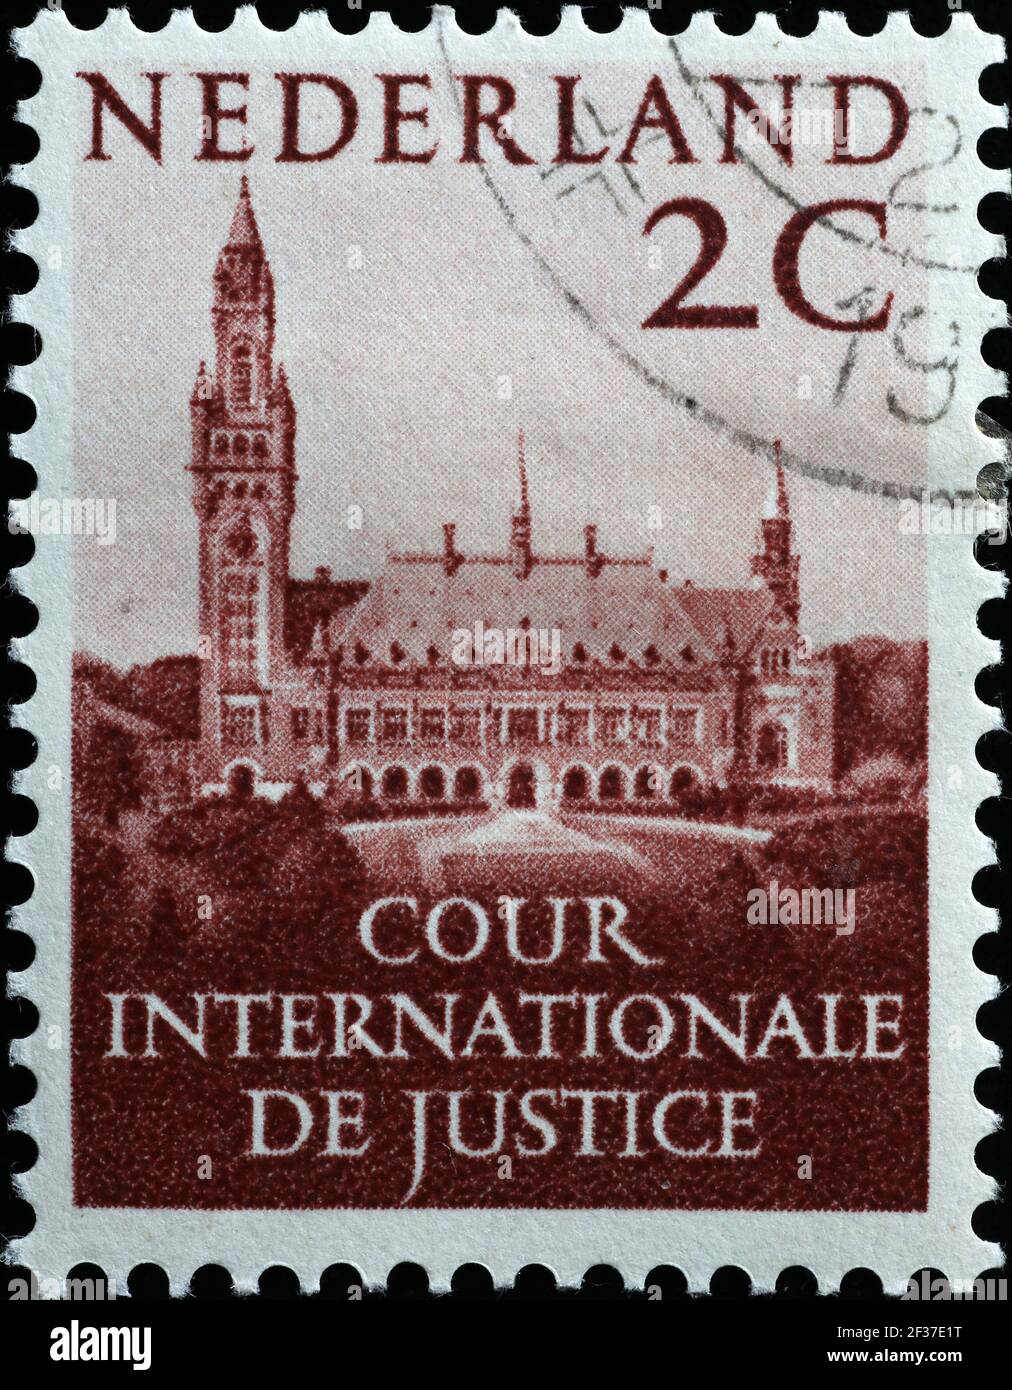 International Court of Justice on dutch postage stamp Stock Photo